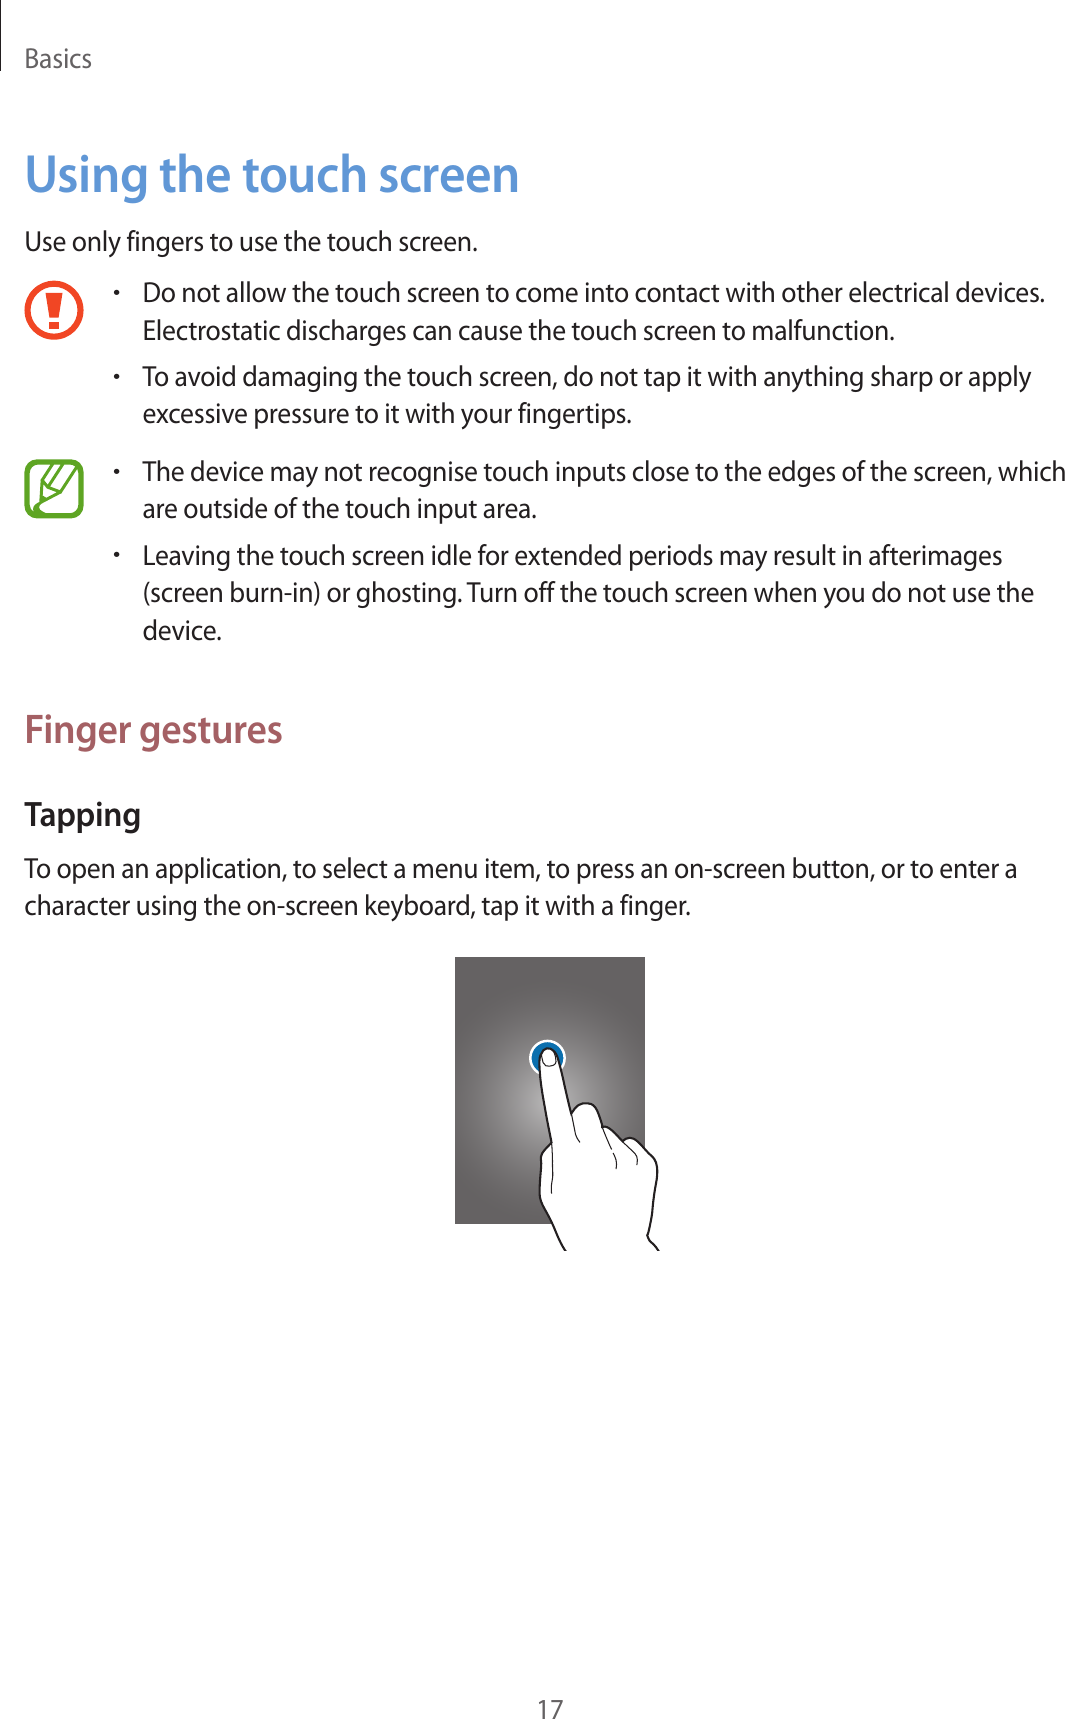 Basics17Using the touch screenUse only fingers to use the touch screen.•Do not allow the touch screen to come into contact with other electrical devices. Electrostatic discharges can cause the touch screen to malfunction.•To avoid damaging the touch screen, do not tap it with anything sharp or apply excessive pressure to it with your fingertips.•The device may not recognise touch inputs close to the edges of the screen, which are outside of the touch input area.•Leaving the touch screen idle for extended periods may result in afterimages (screen burn-in) or ghosting. Turn off the touch screen when you do not use the device.Finger gesturesTappingTo open an application, to select a menu item, to press an on-screen button, or to enter a character using the on-screen keyboard, tap it with a finger.